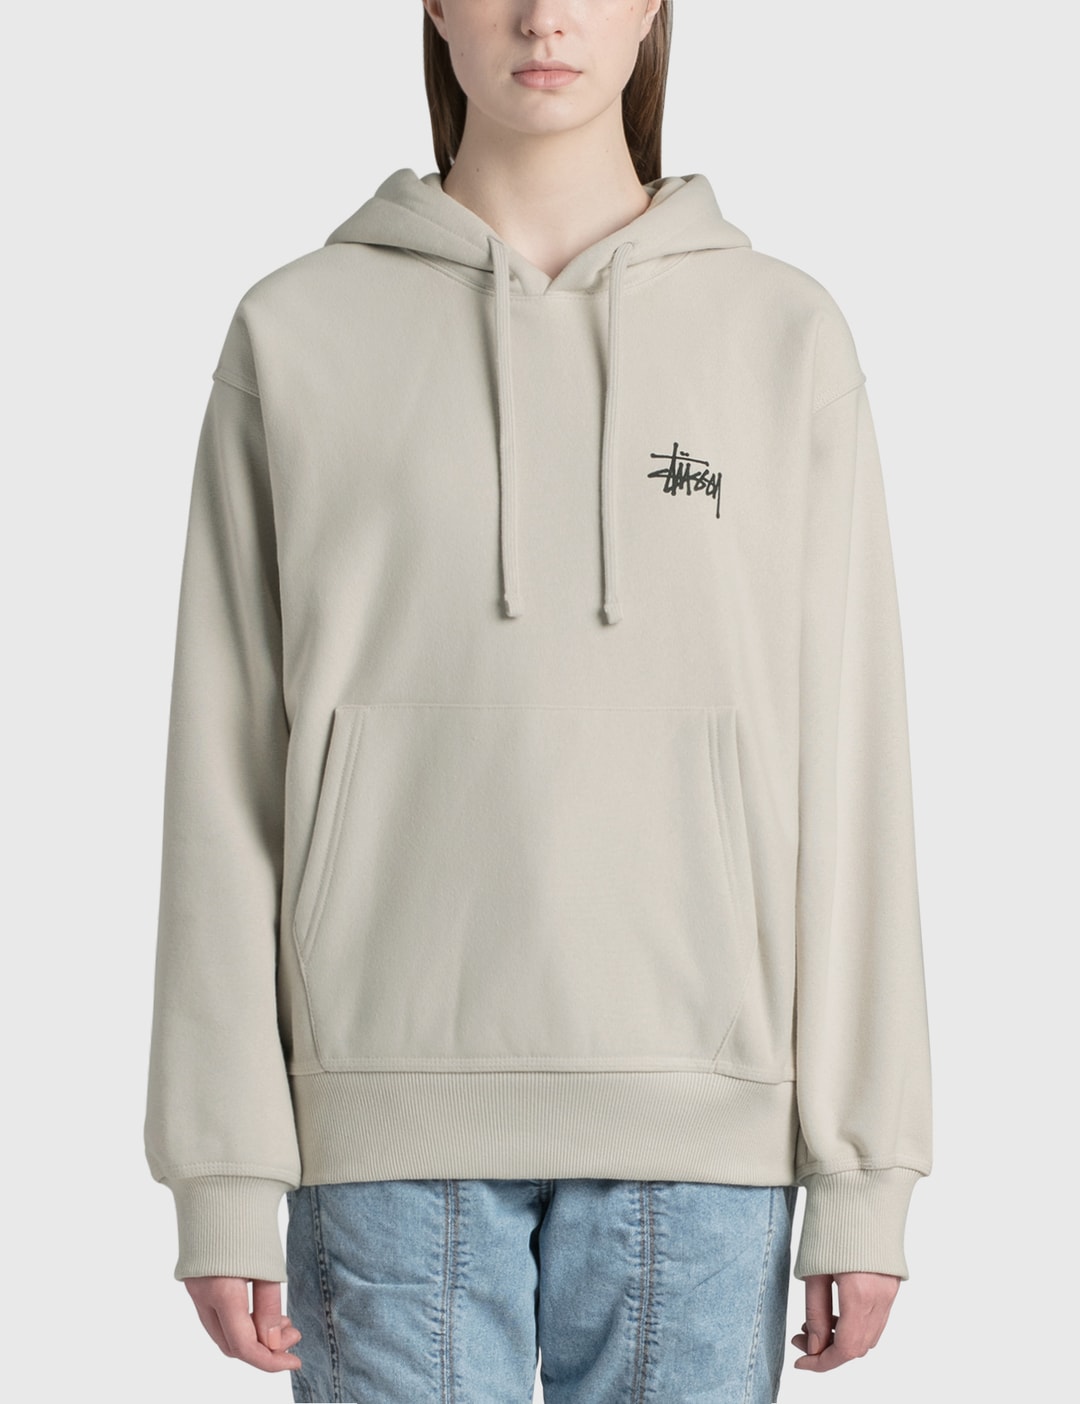 Authorization Tackle tea Stussy - Basic Stüssy Hoodie | HBX - Globally Curated Fashion and Lifestyle  by Hypebeast